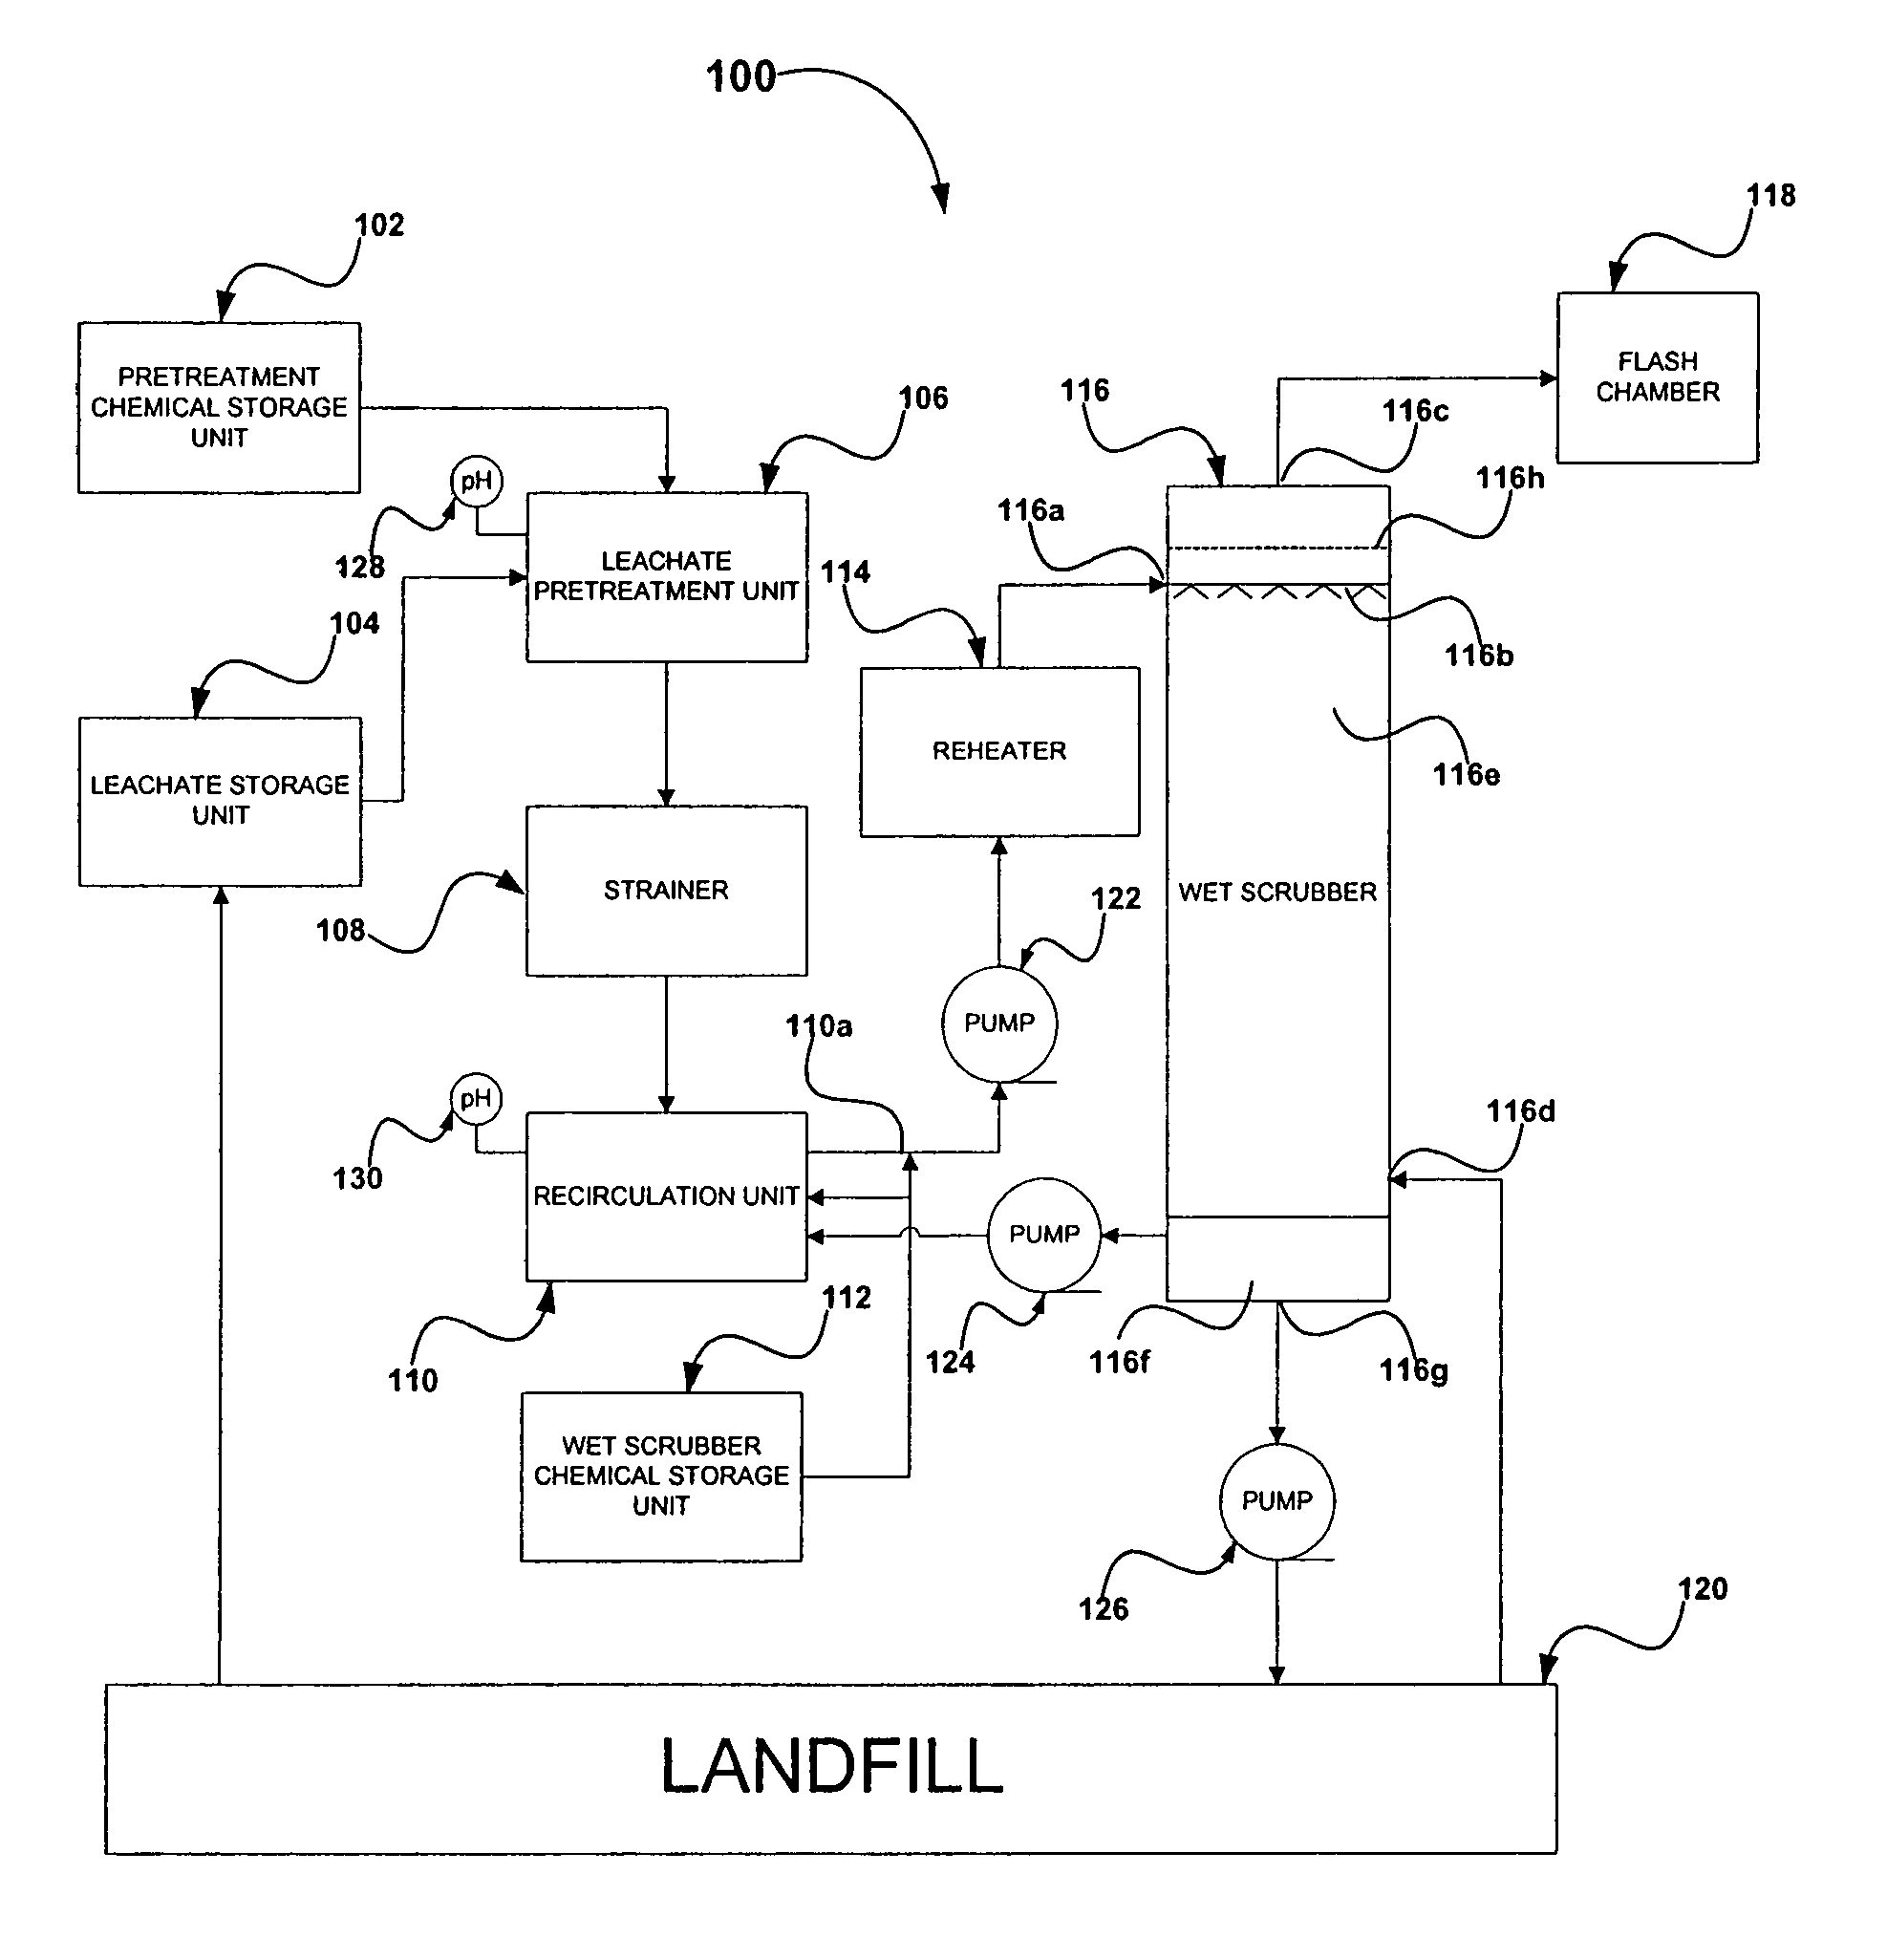 System and method for treating landfill gas using landfill leachate